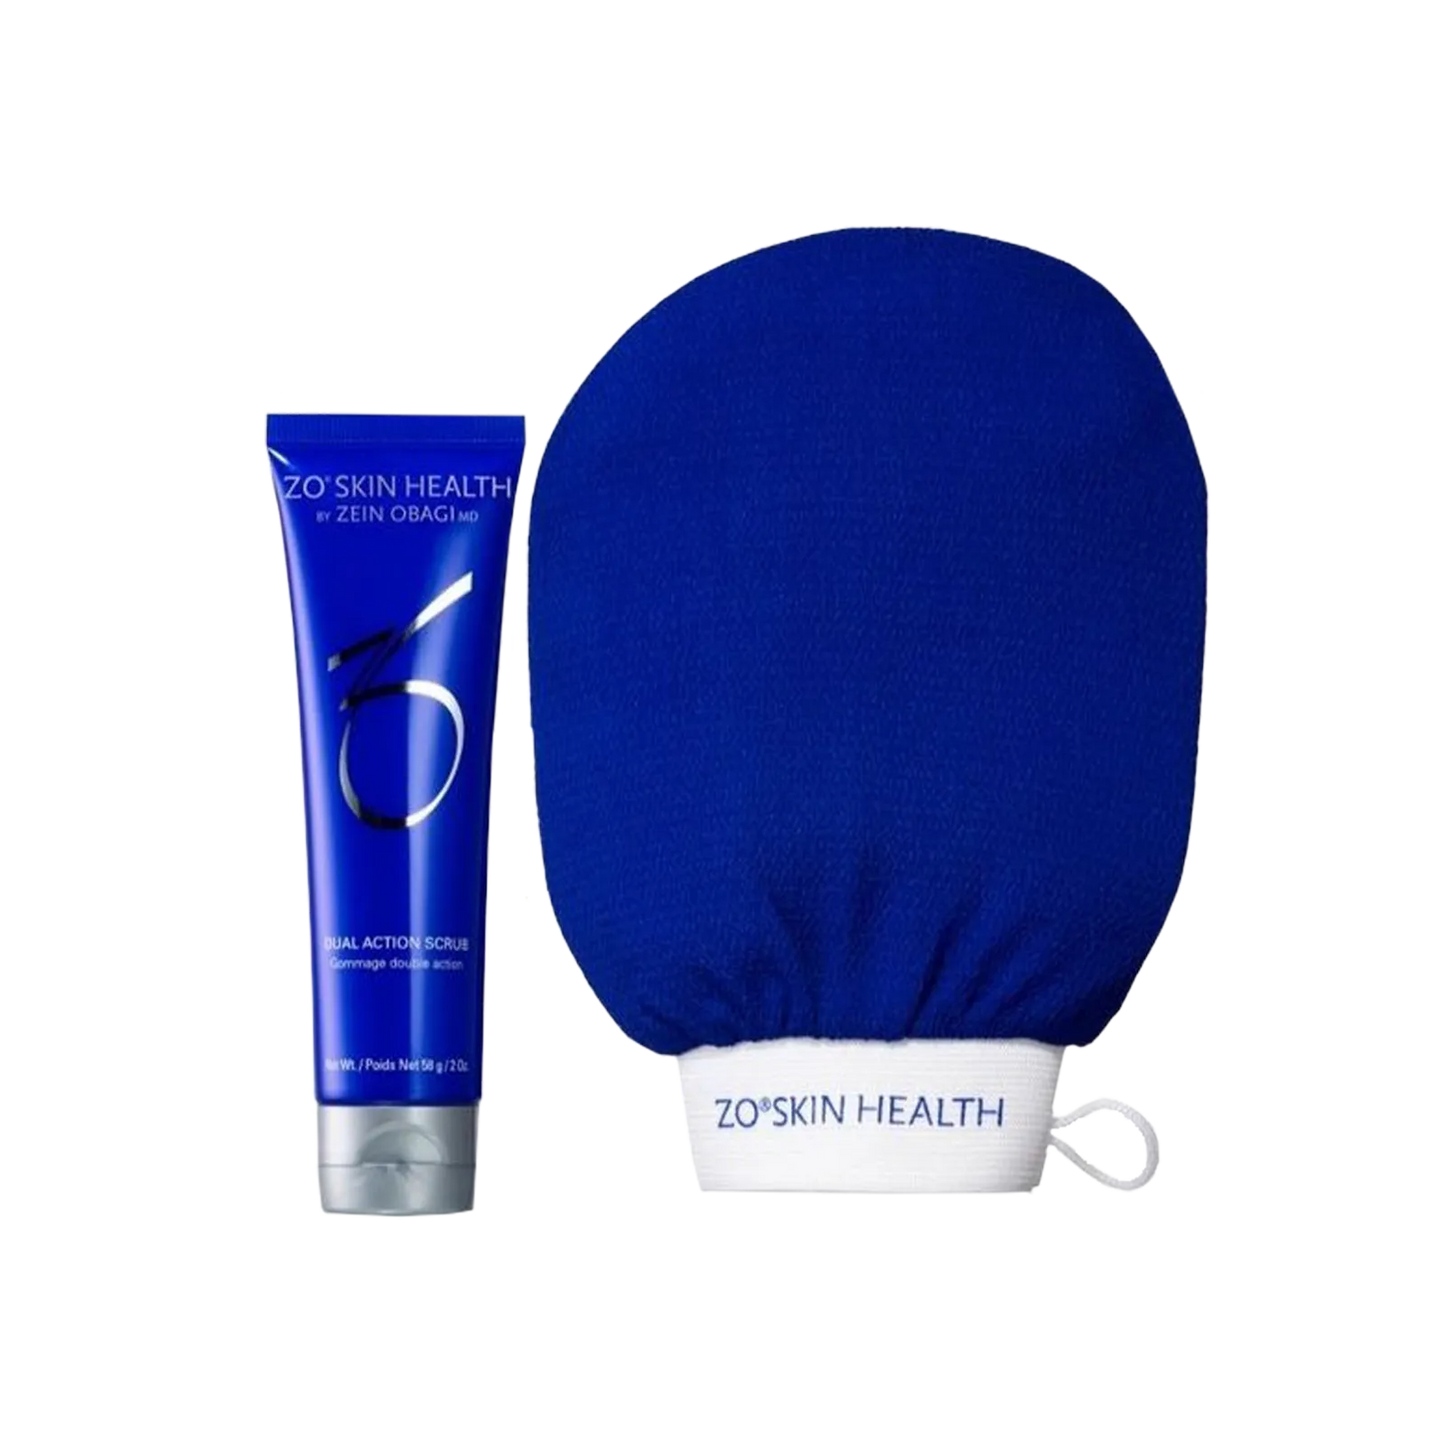 ZO Skin Health Dual Action Scrub with Mitten Gift with Purchase